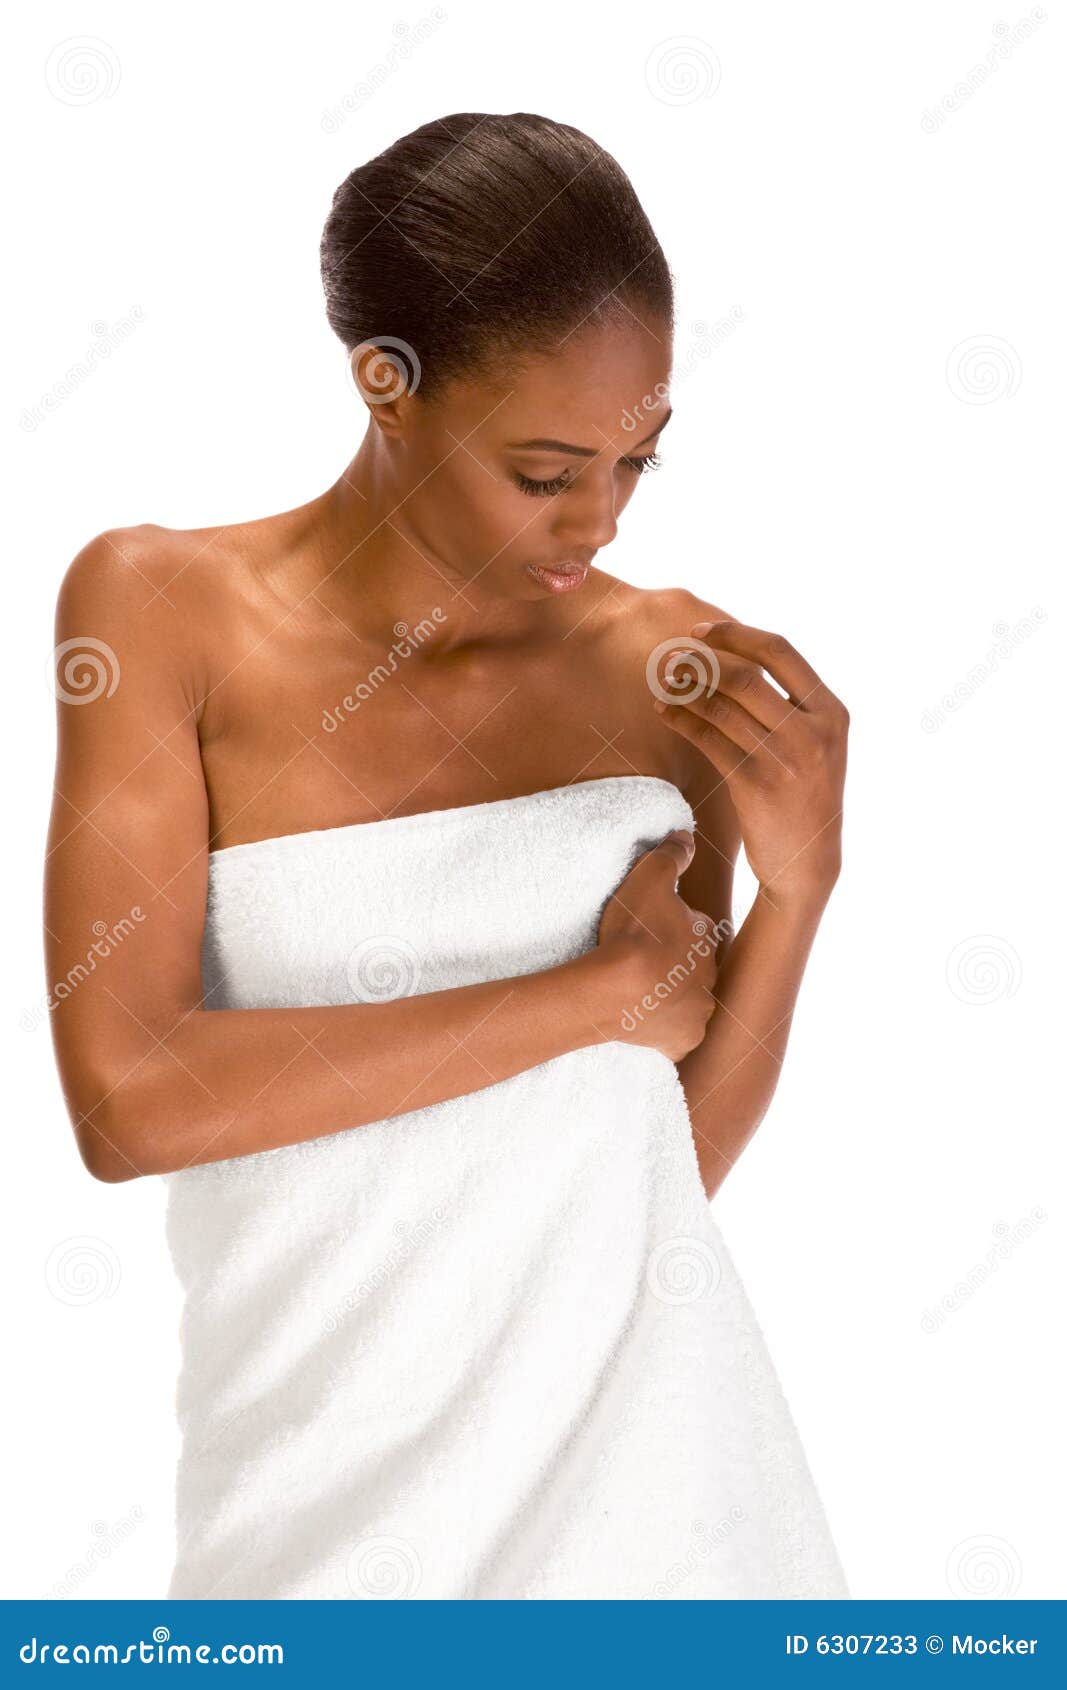 African-American Girl Wrapped in White Bath Towel Stock Image